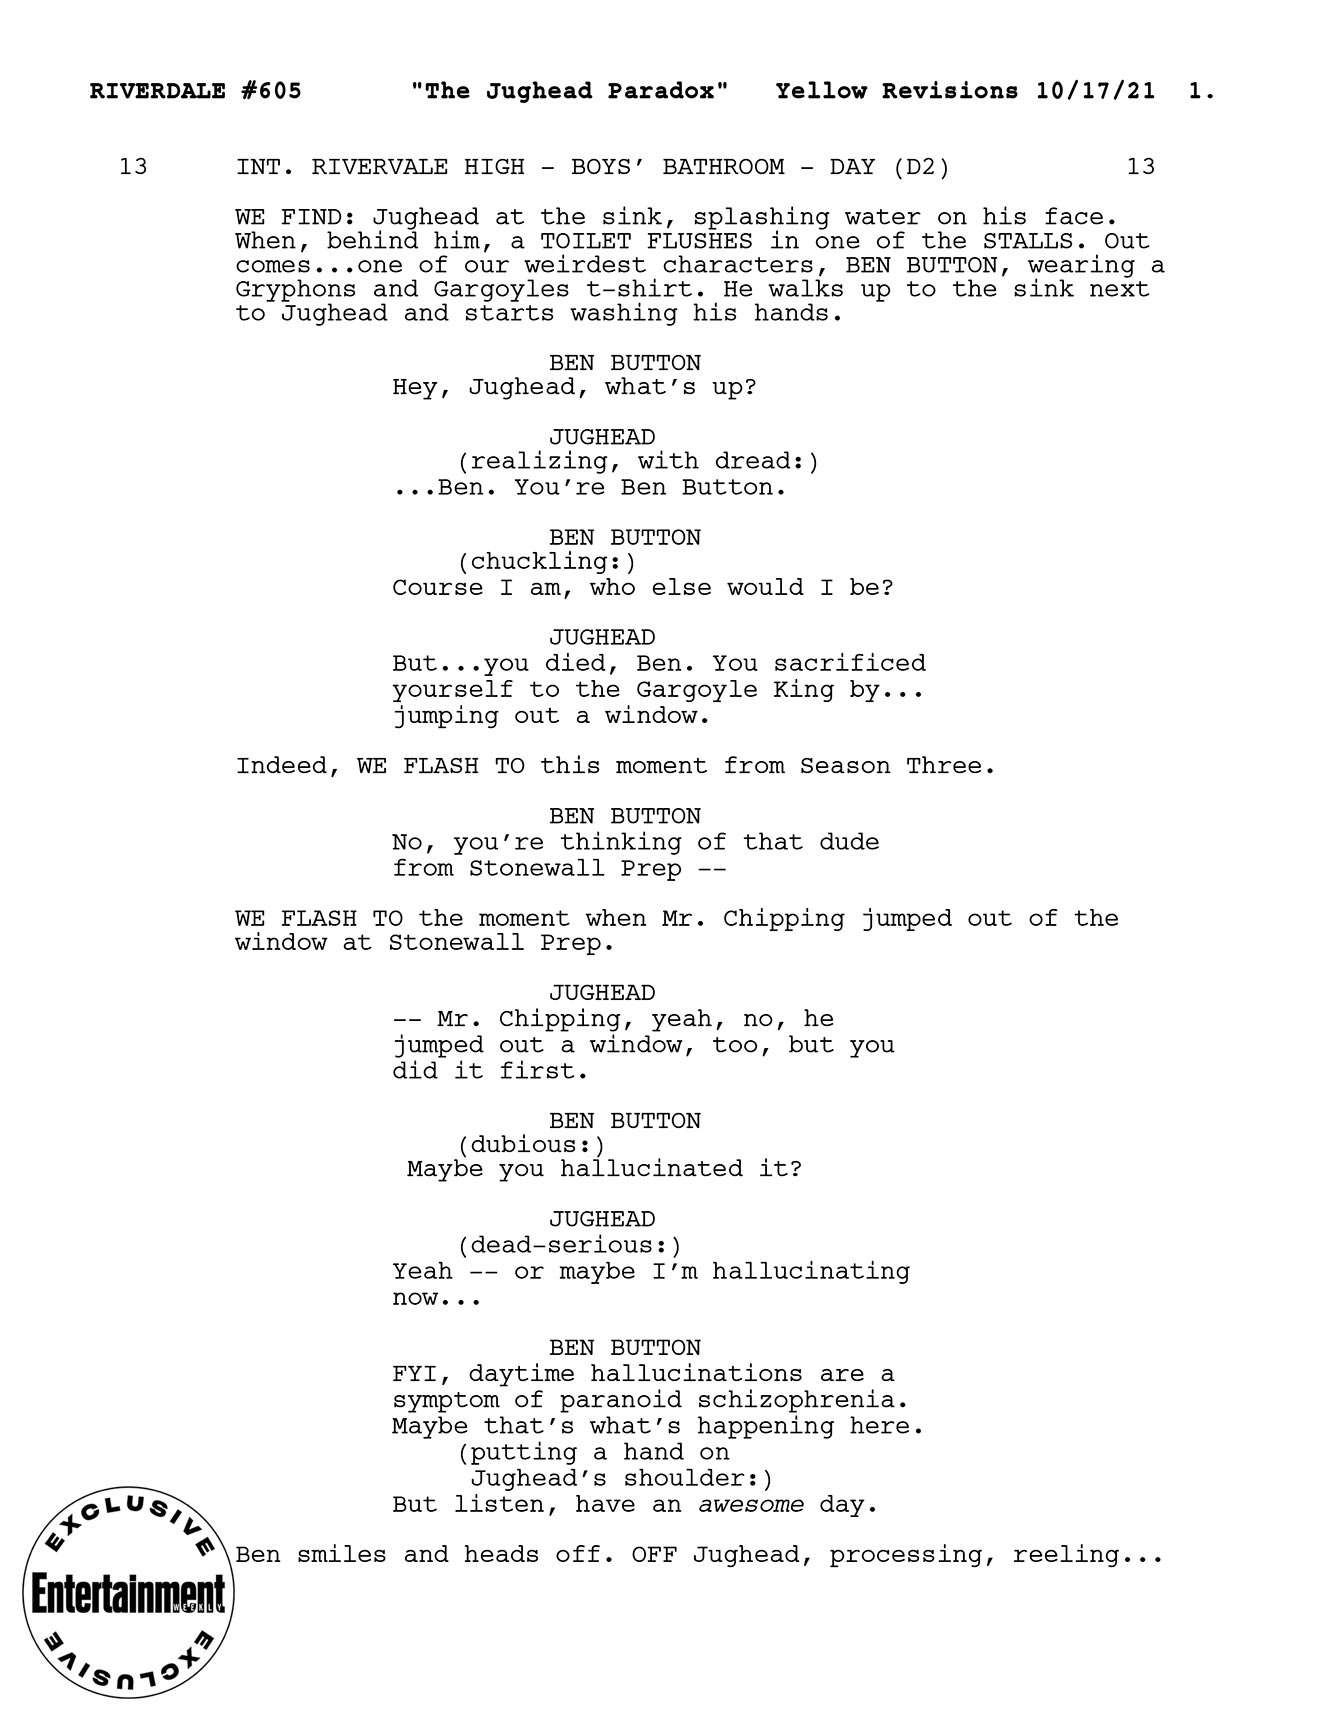 Riverdale script page for the Jughead Paradox